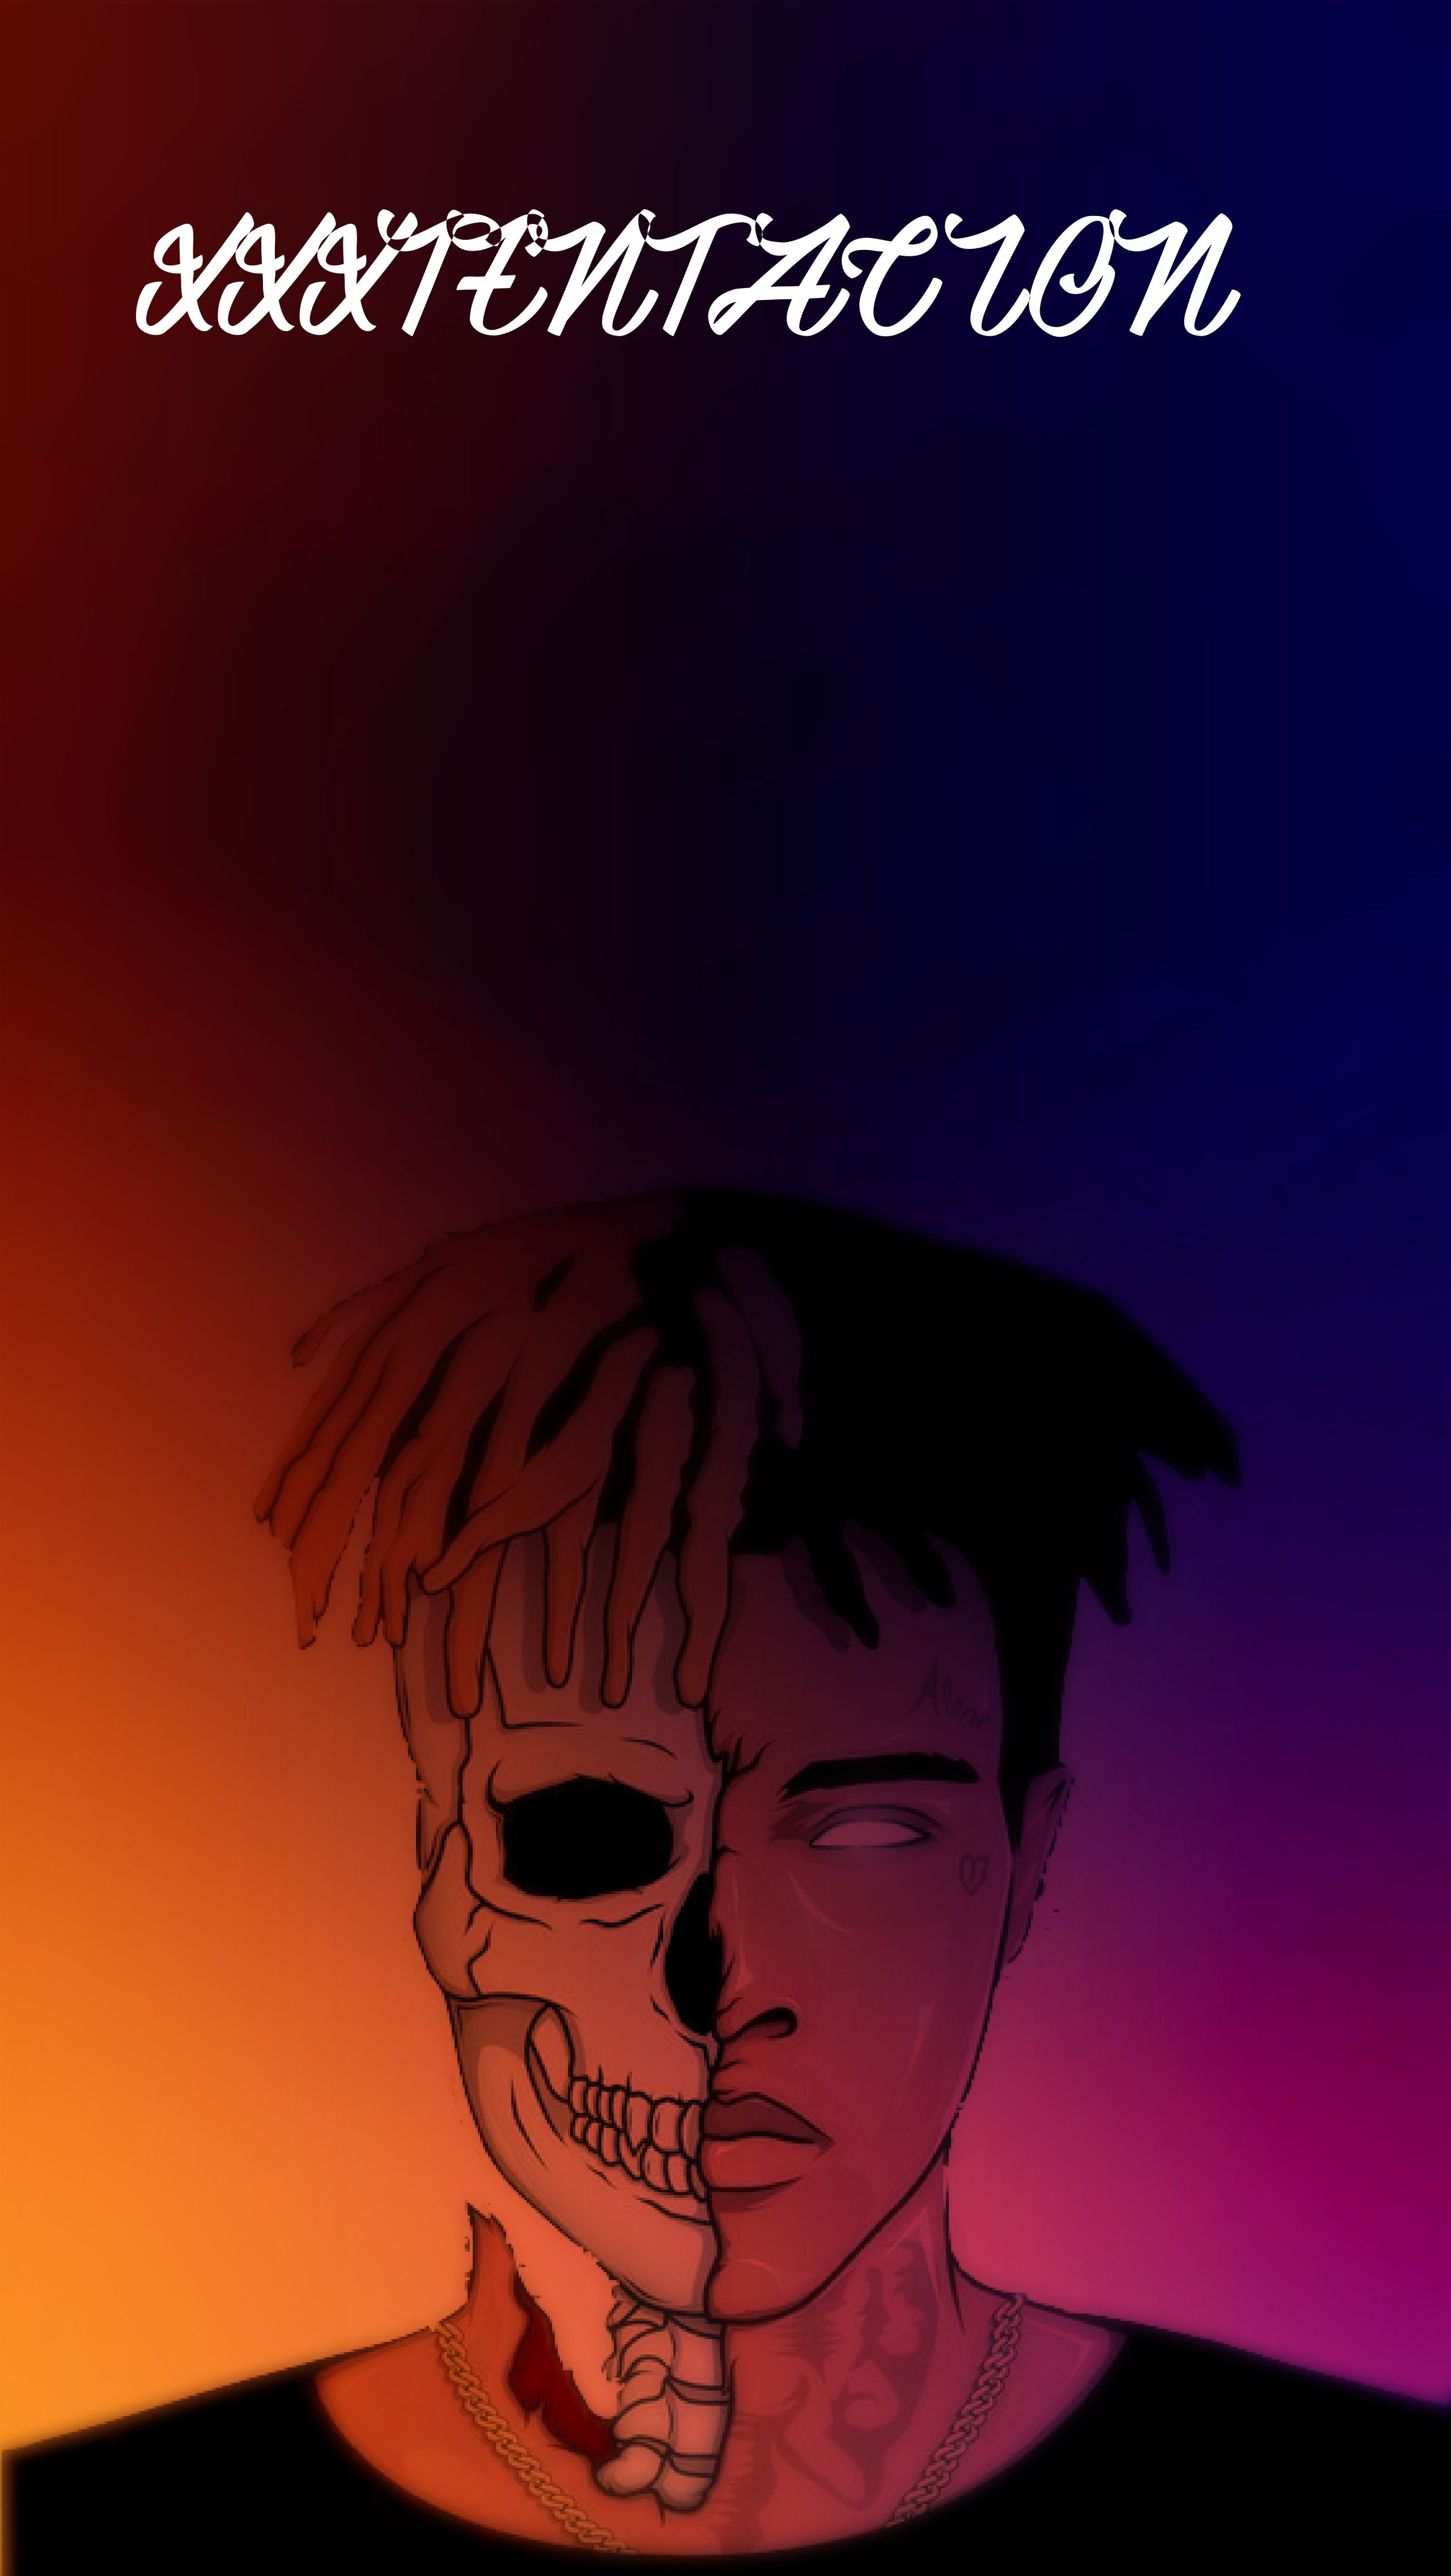 A poster of the face and skull with text - XXXTentacion